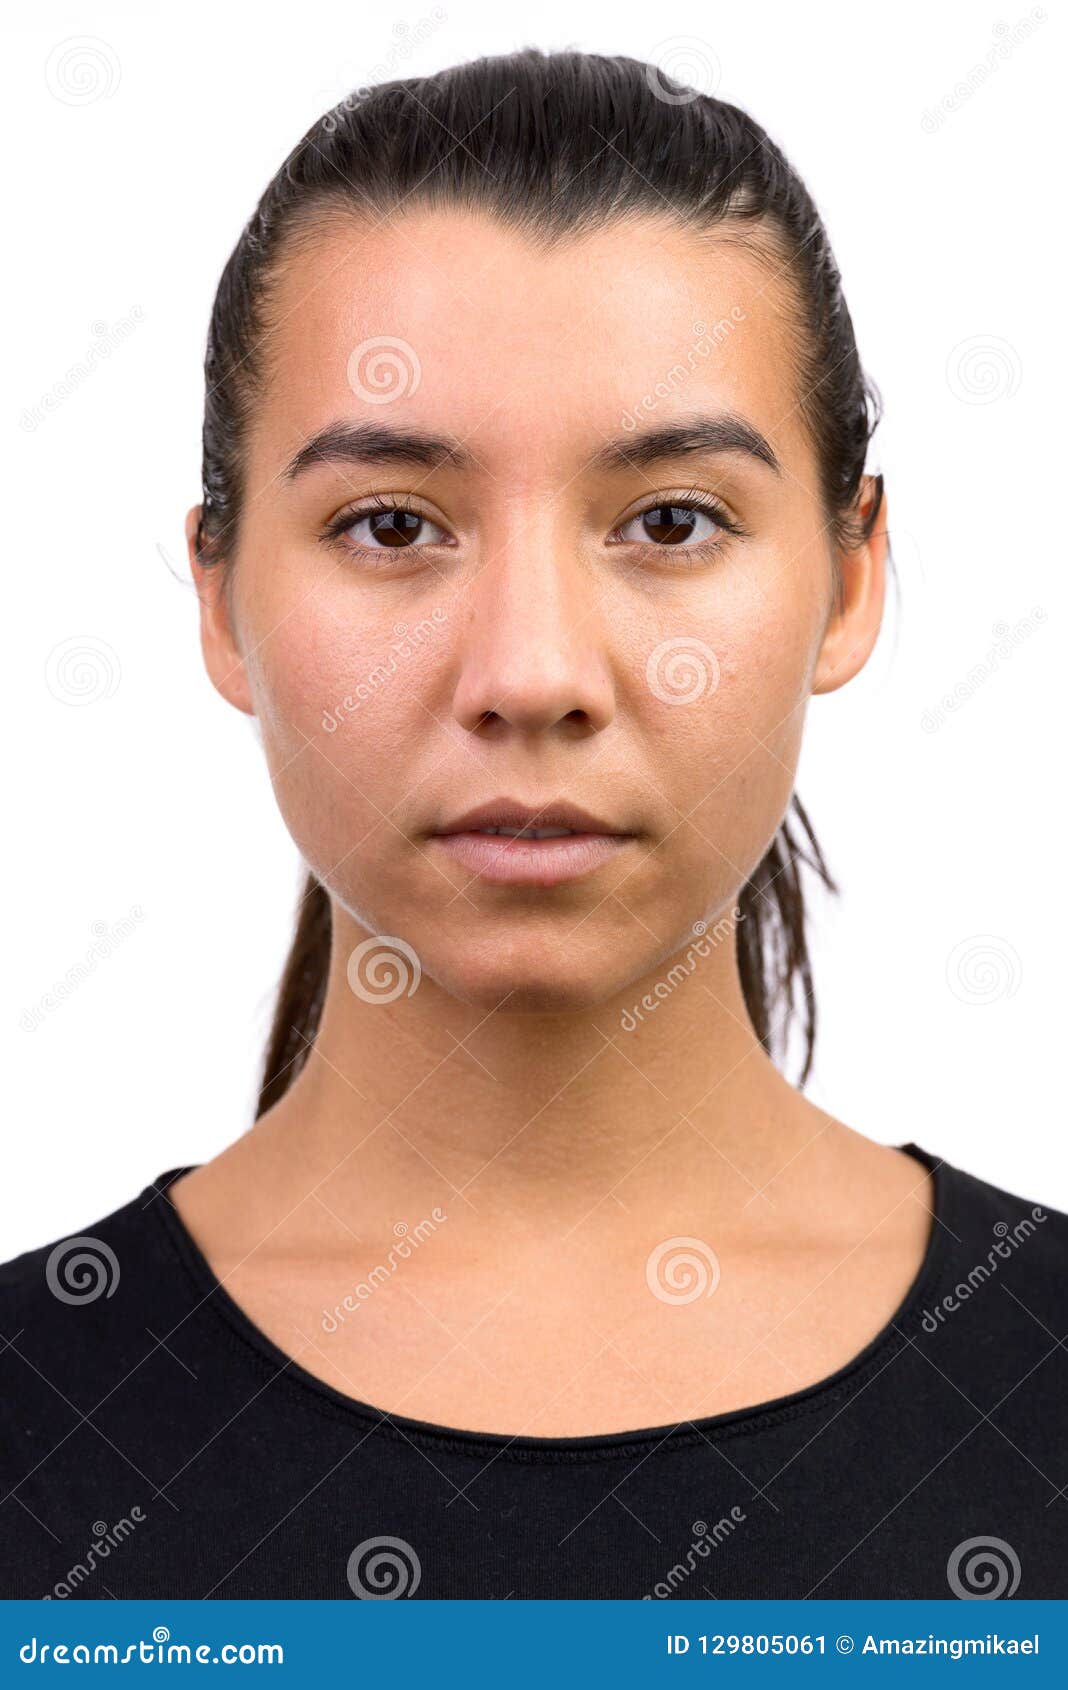 Face of Young Beautiful Caucasian Woman with Hair Tied Back Stock Image -  Image of youth, cute: 129805061